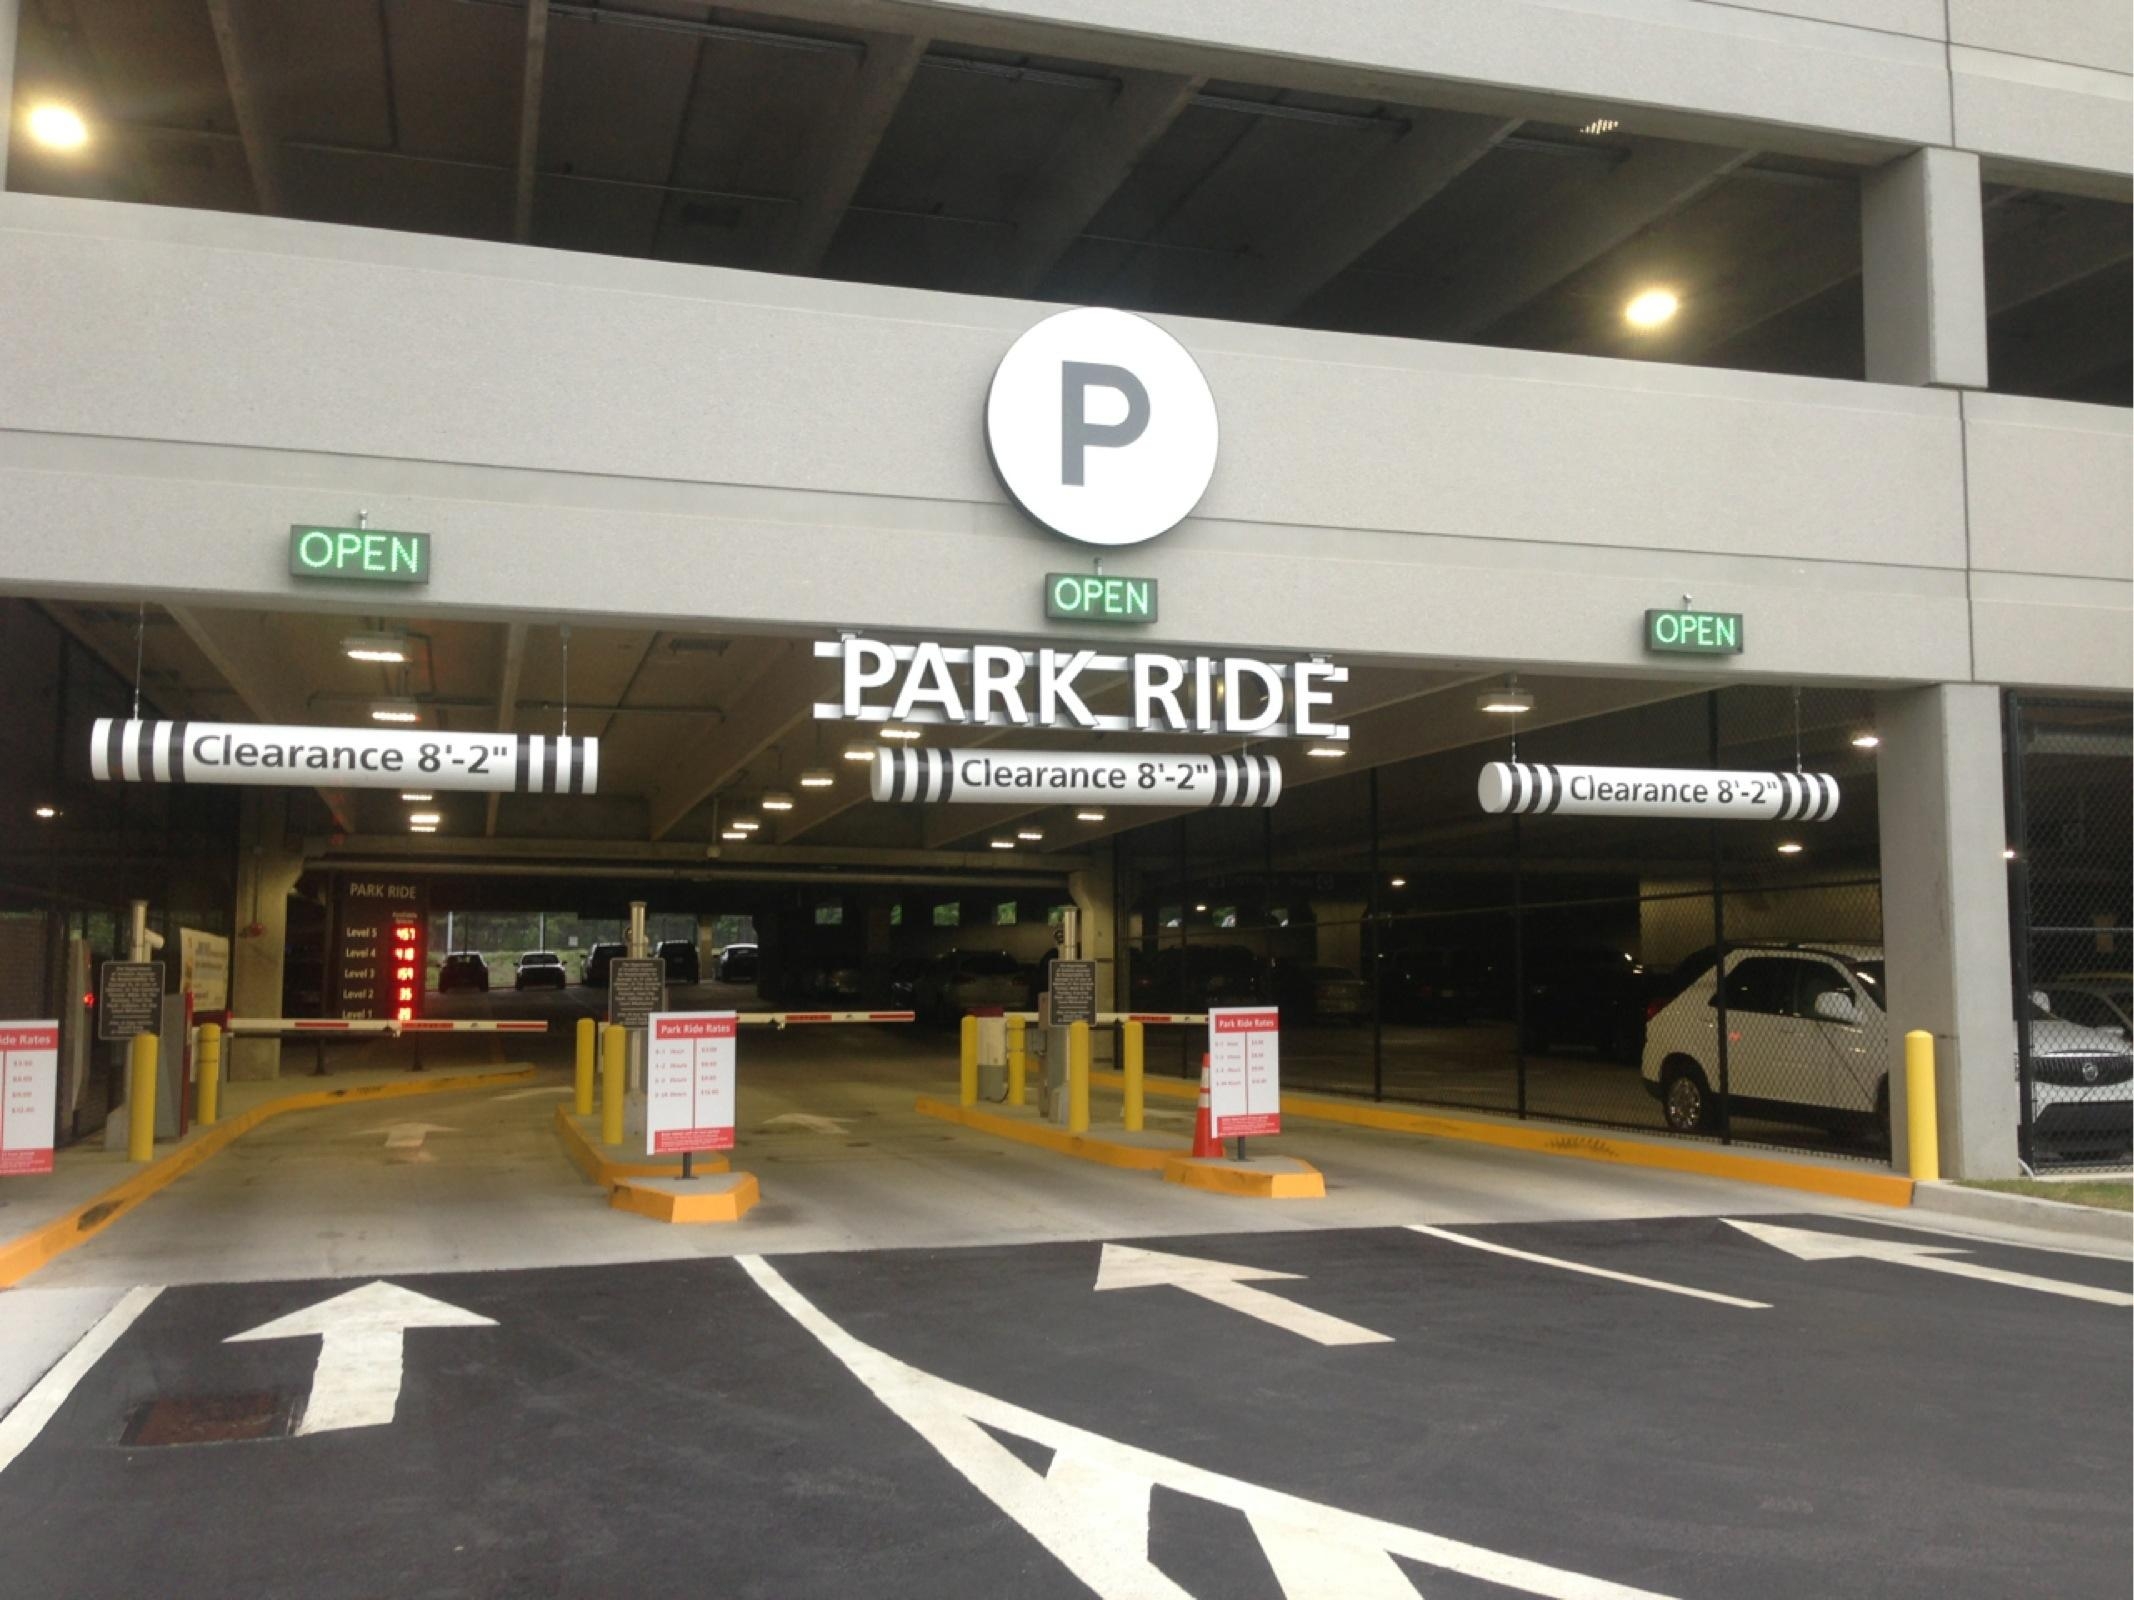 Atlanta Airport Parking Map Miami Airport Parking Guide Find Parking